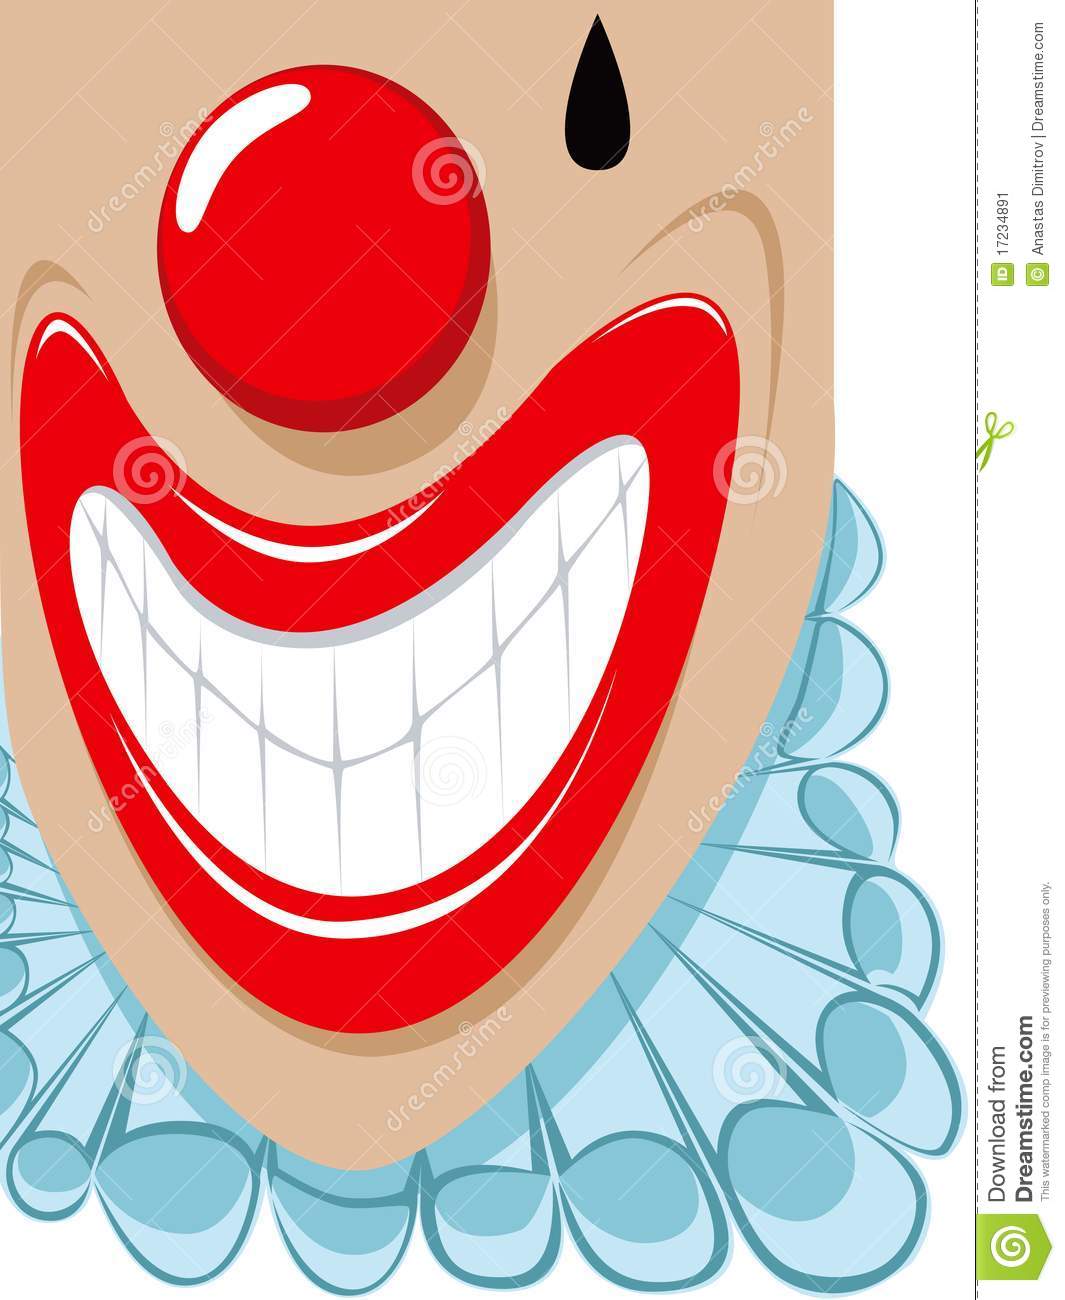 Smilling Clown With His Collar Poping Out Of The Picture Frame  Please